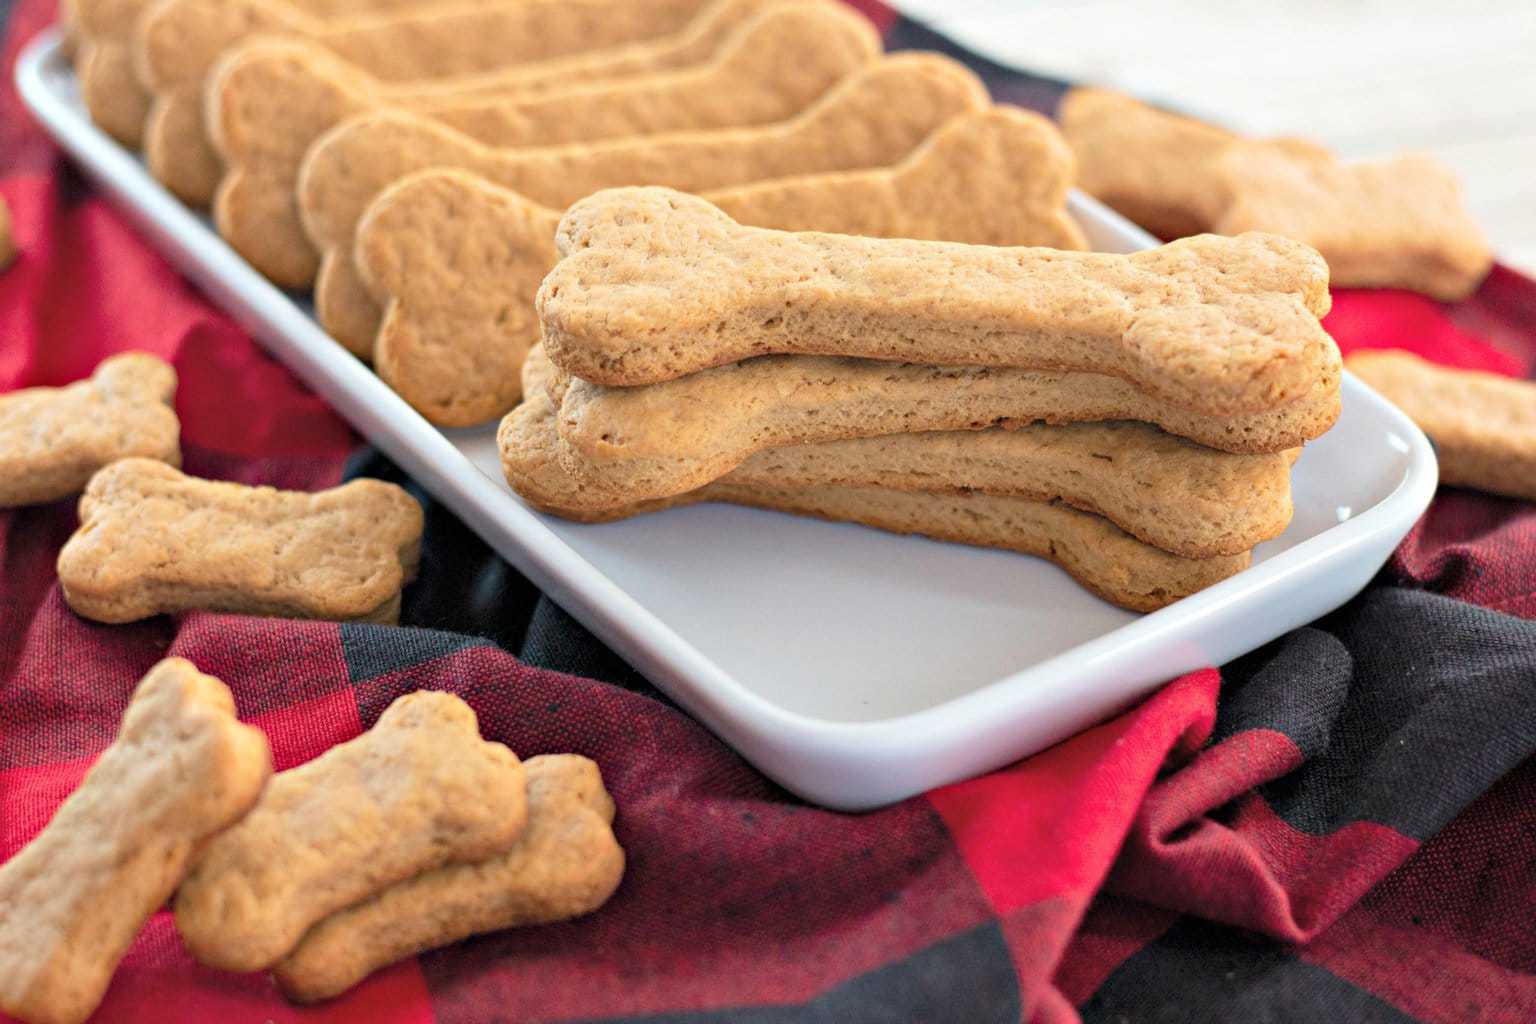 What kind of flour is best for dog treats?